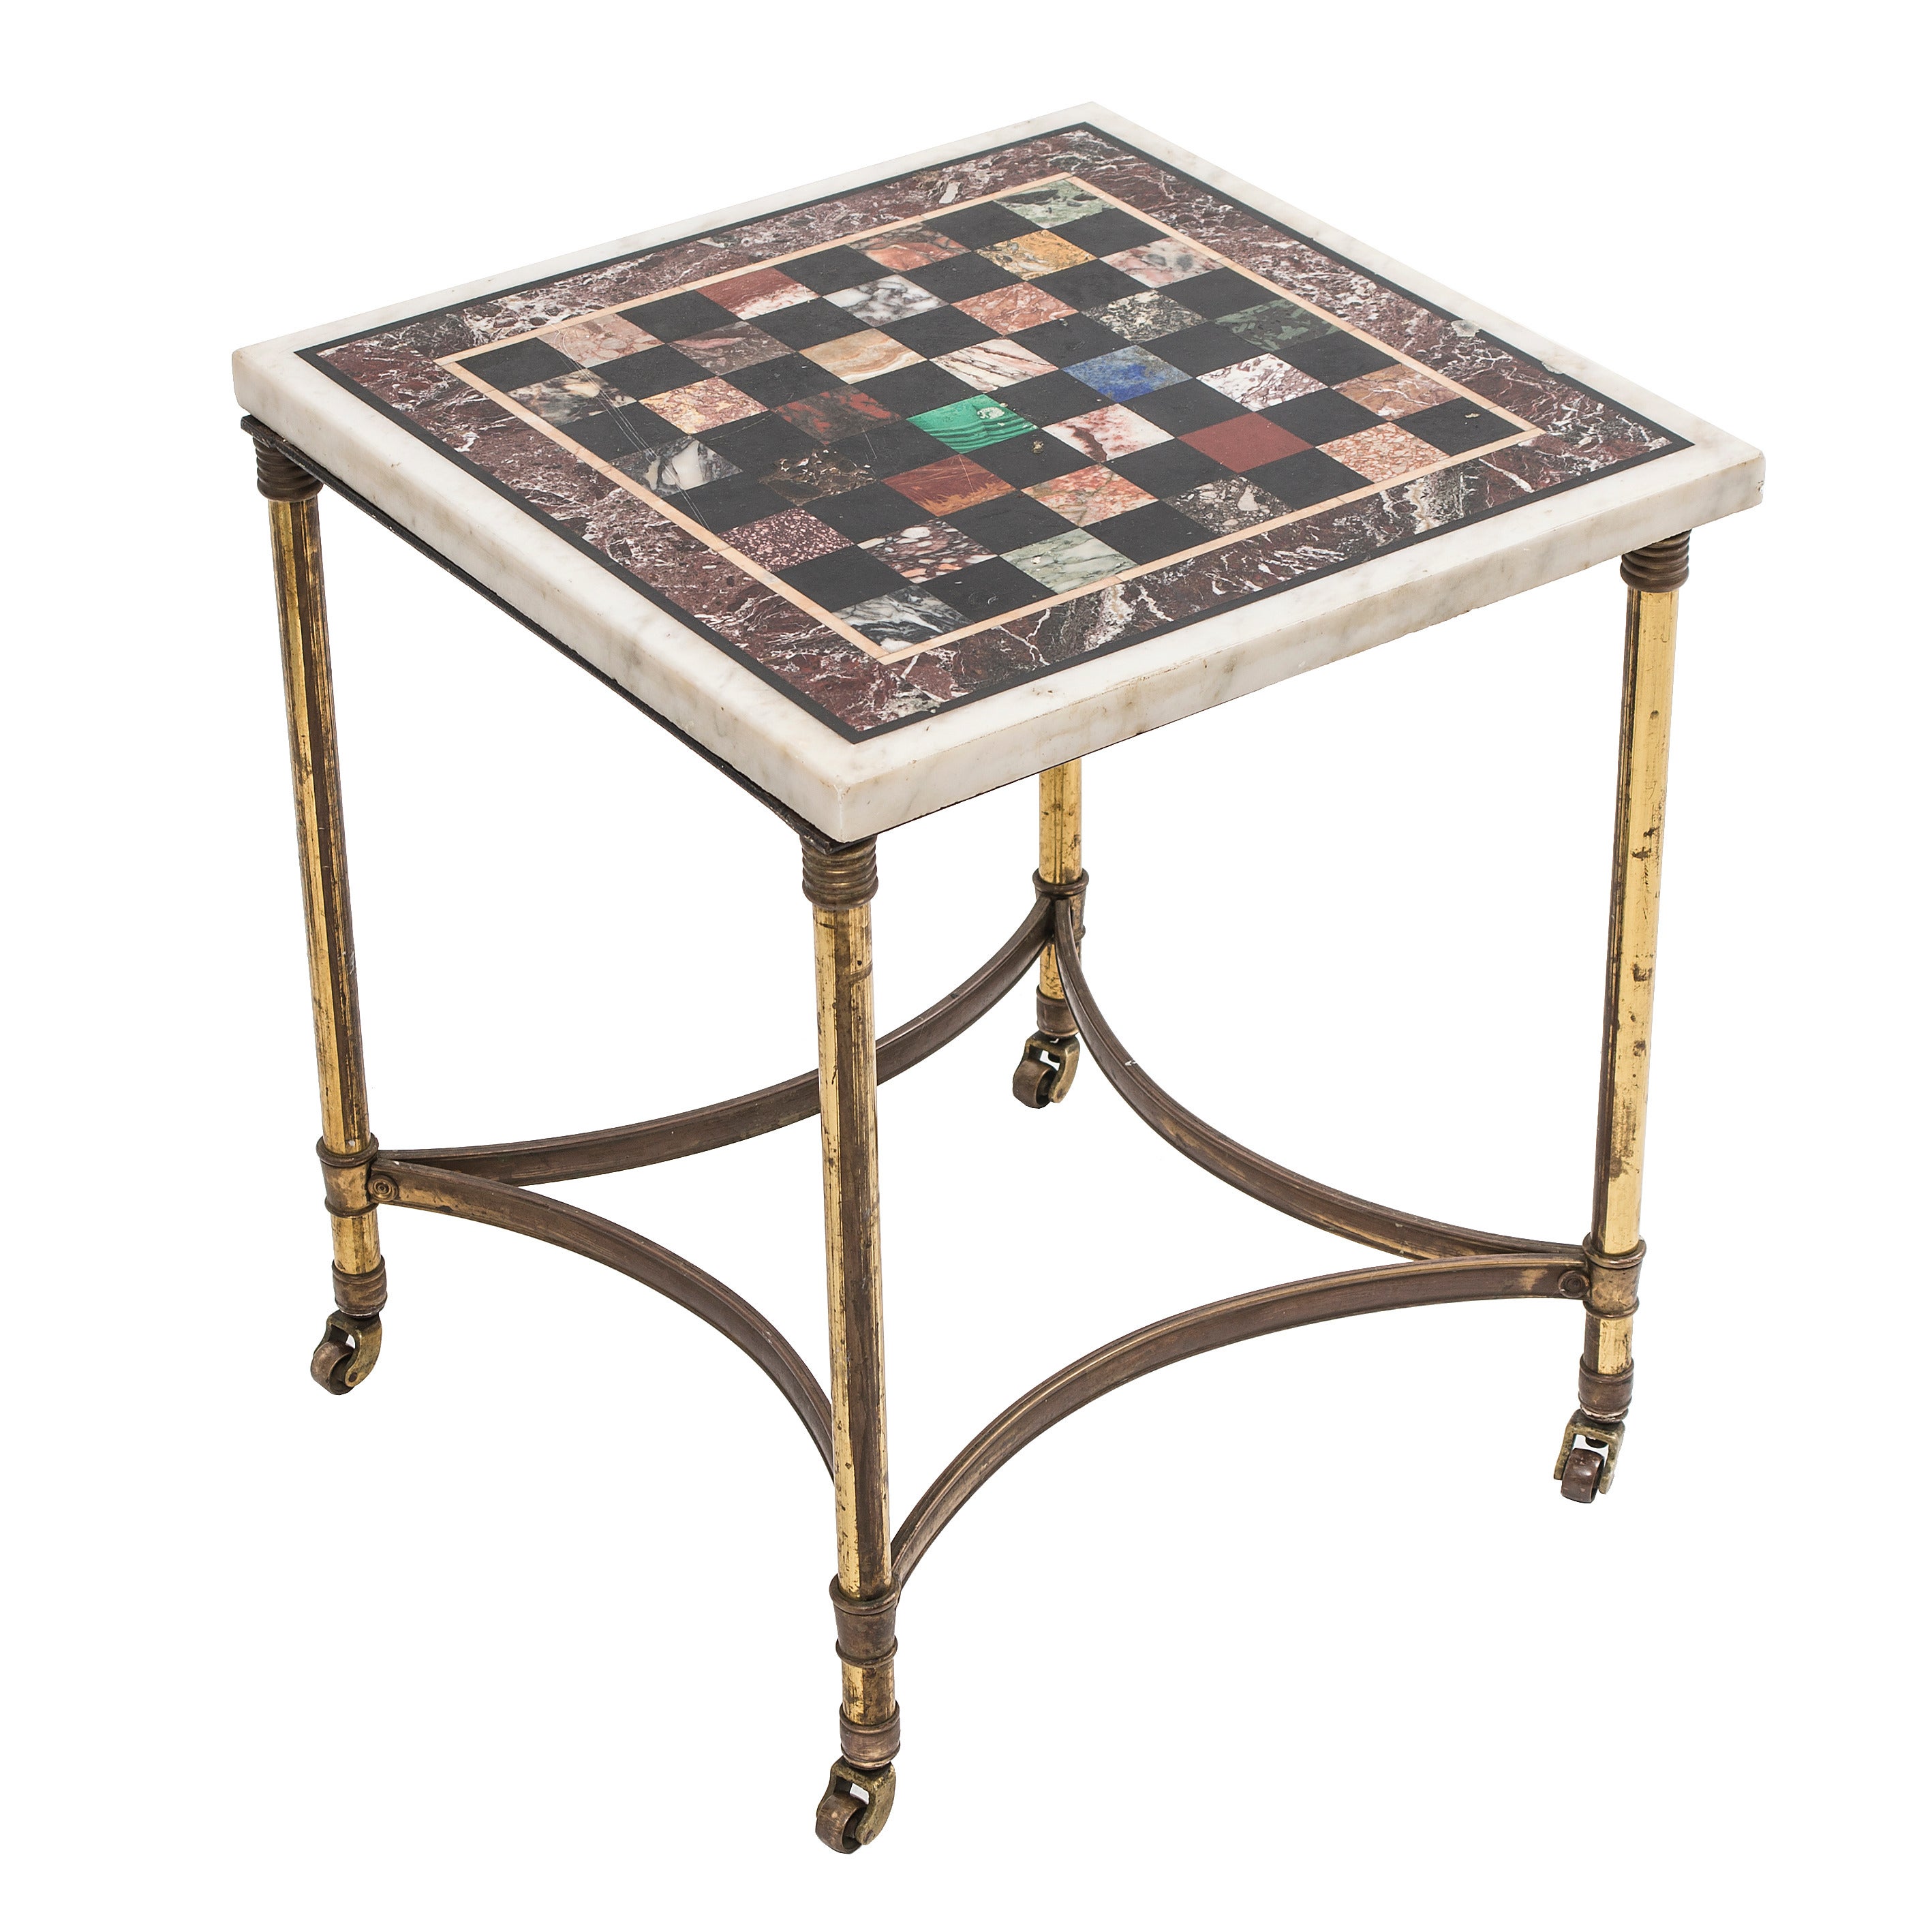 English Low Table with Specimen Marble Chess Top & Brass Base circa 1950